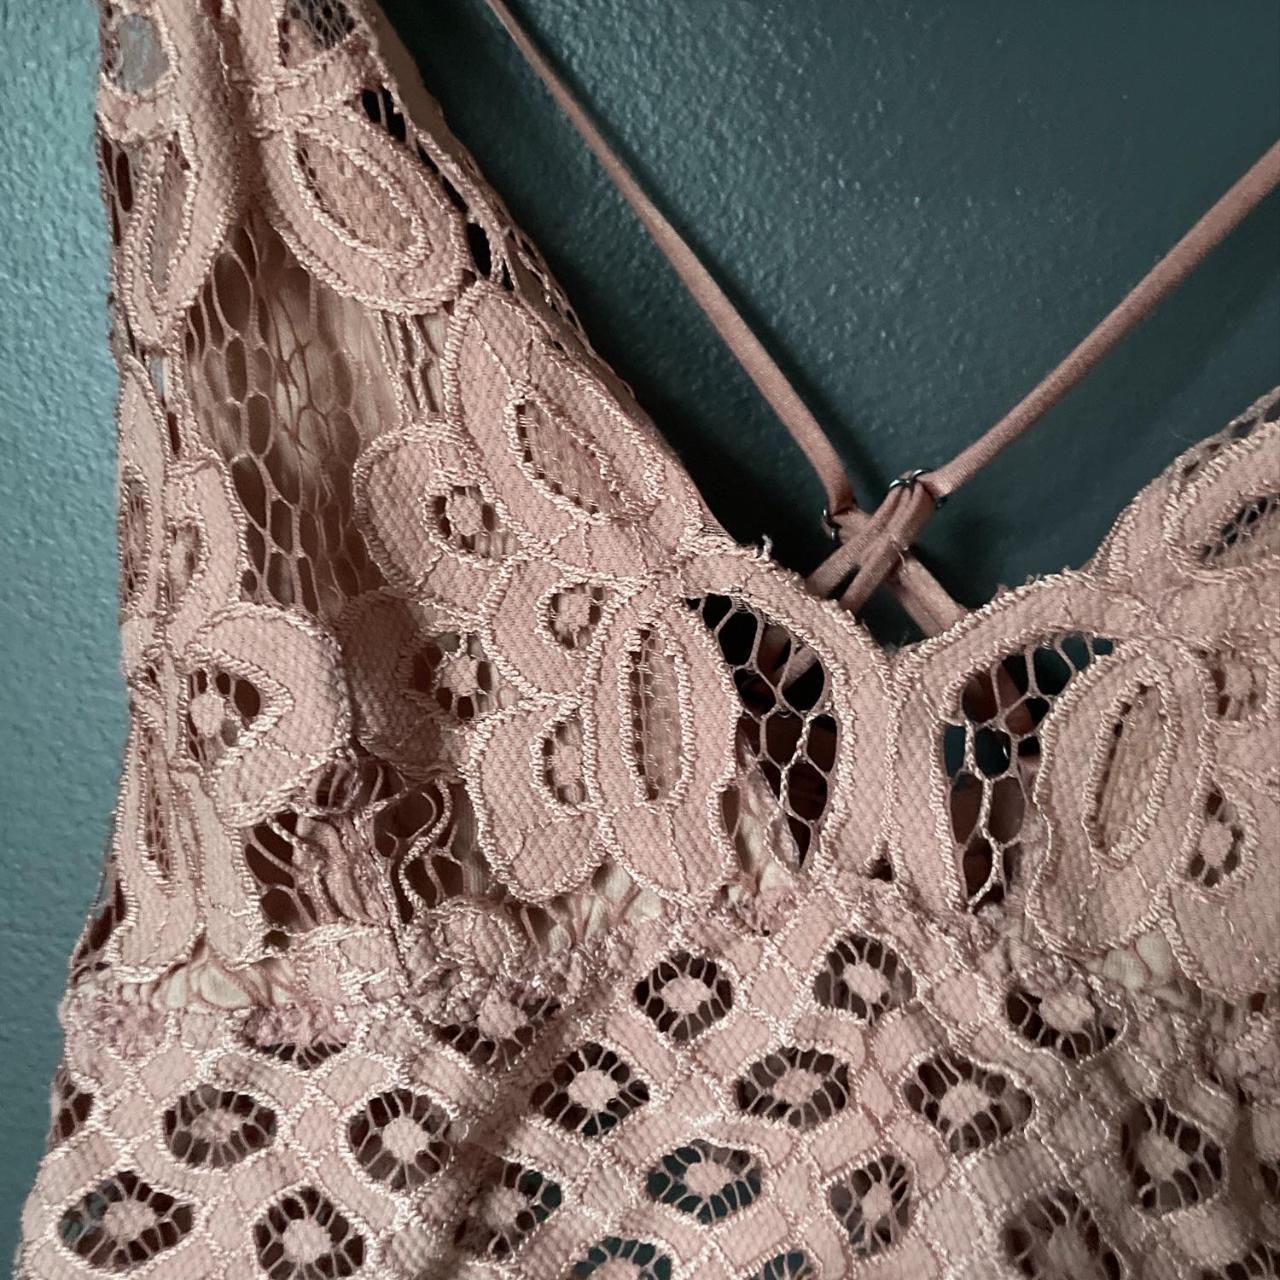 Product Image 2 - Bralette Pink Sz S

Perfect lace